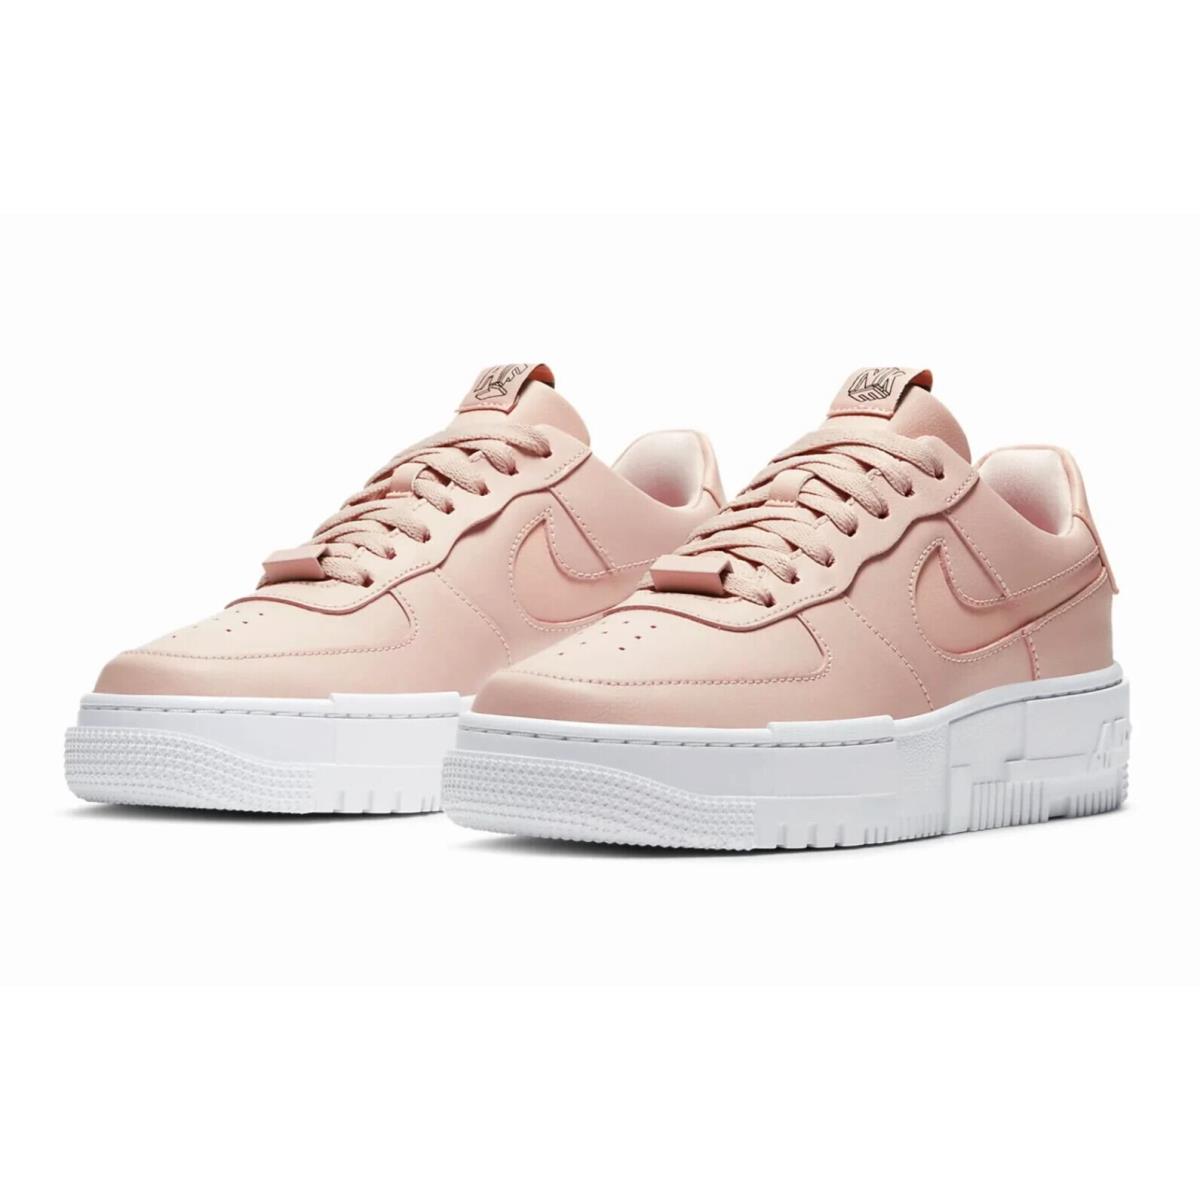 Nike AF1 Pixel Womens Size 10 Shoes CK6649 200 Particle Beige White